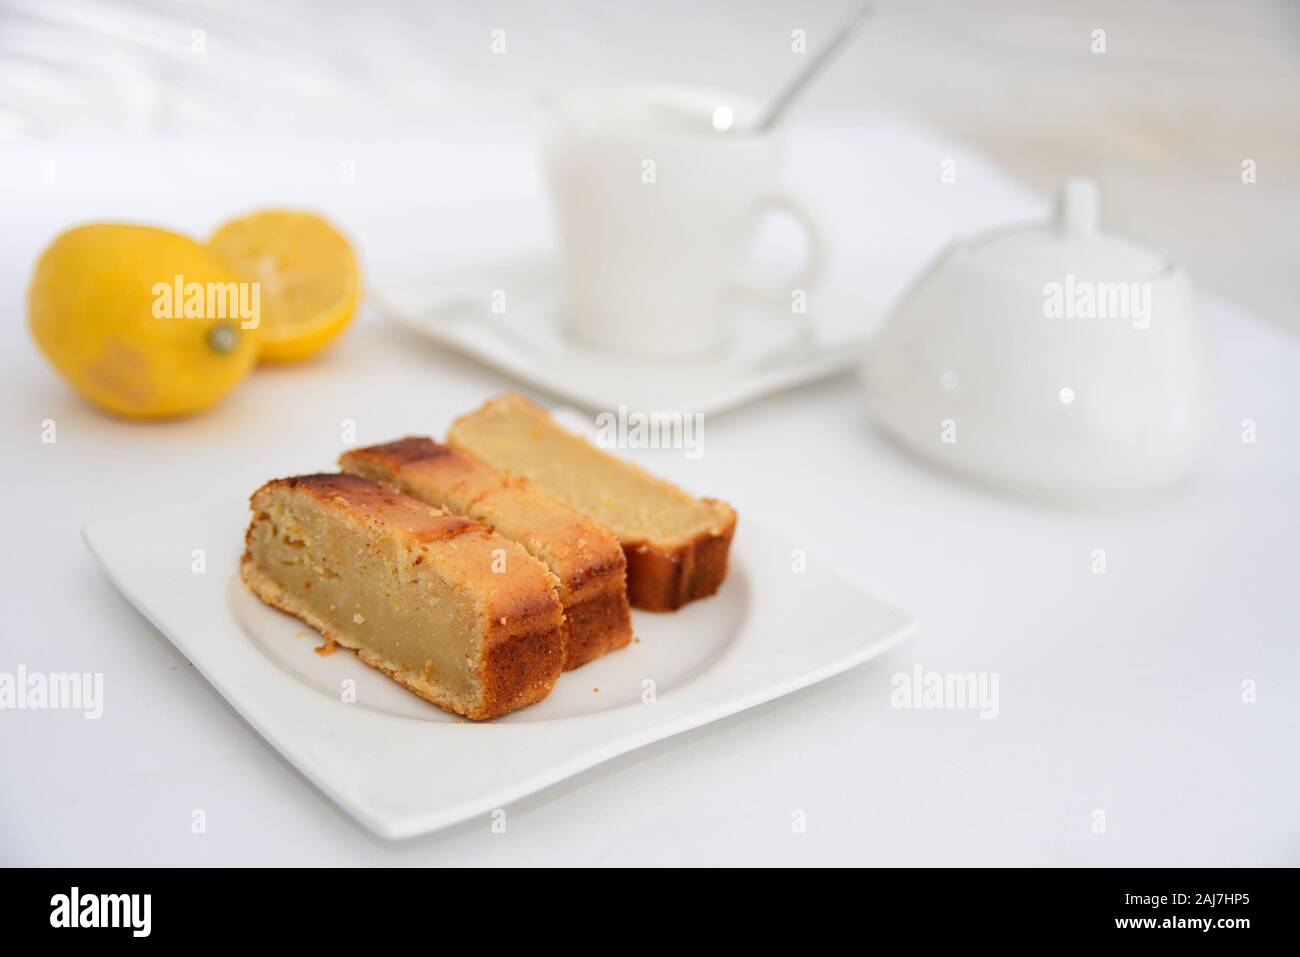 Breakfast with healthy cake Stock Photo